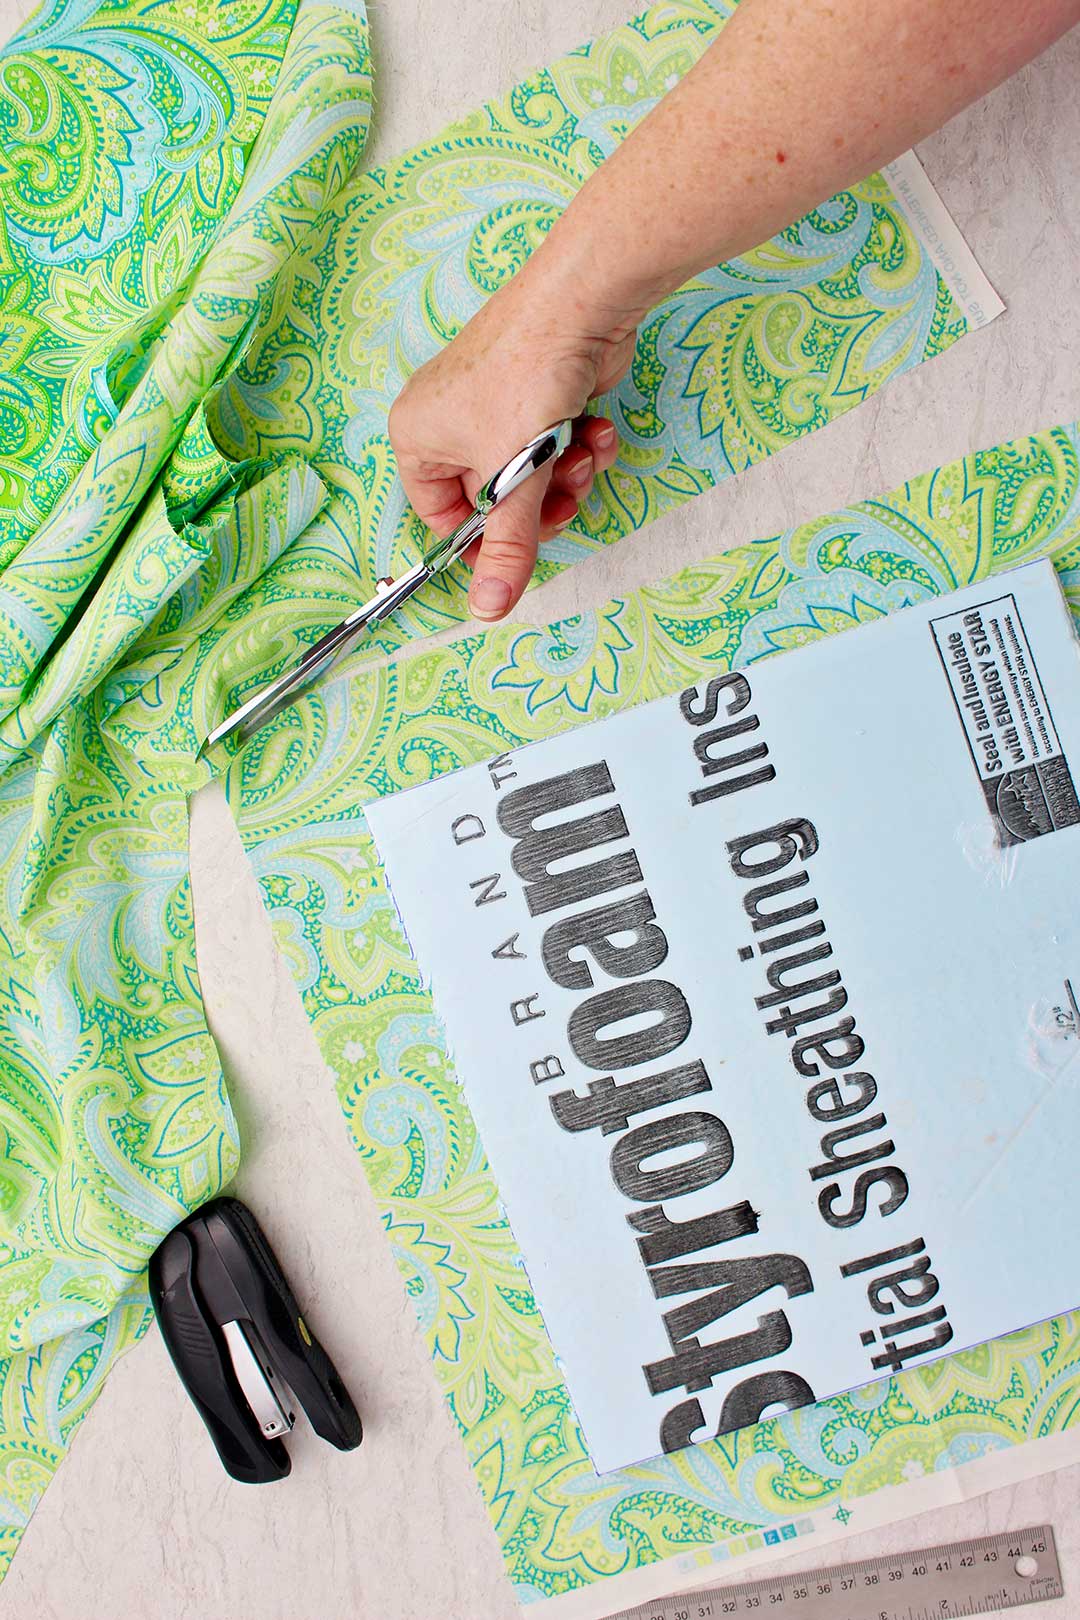 Hand trimming the correct size of green paisley fabric for the foam core bulletin board.